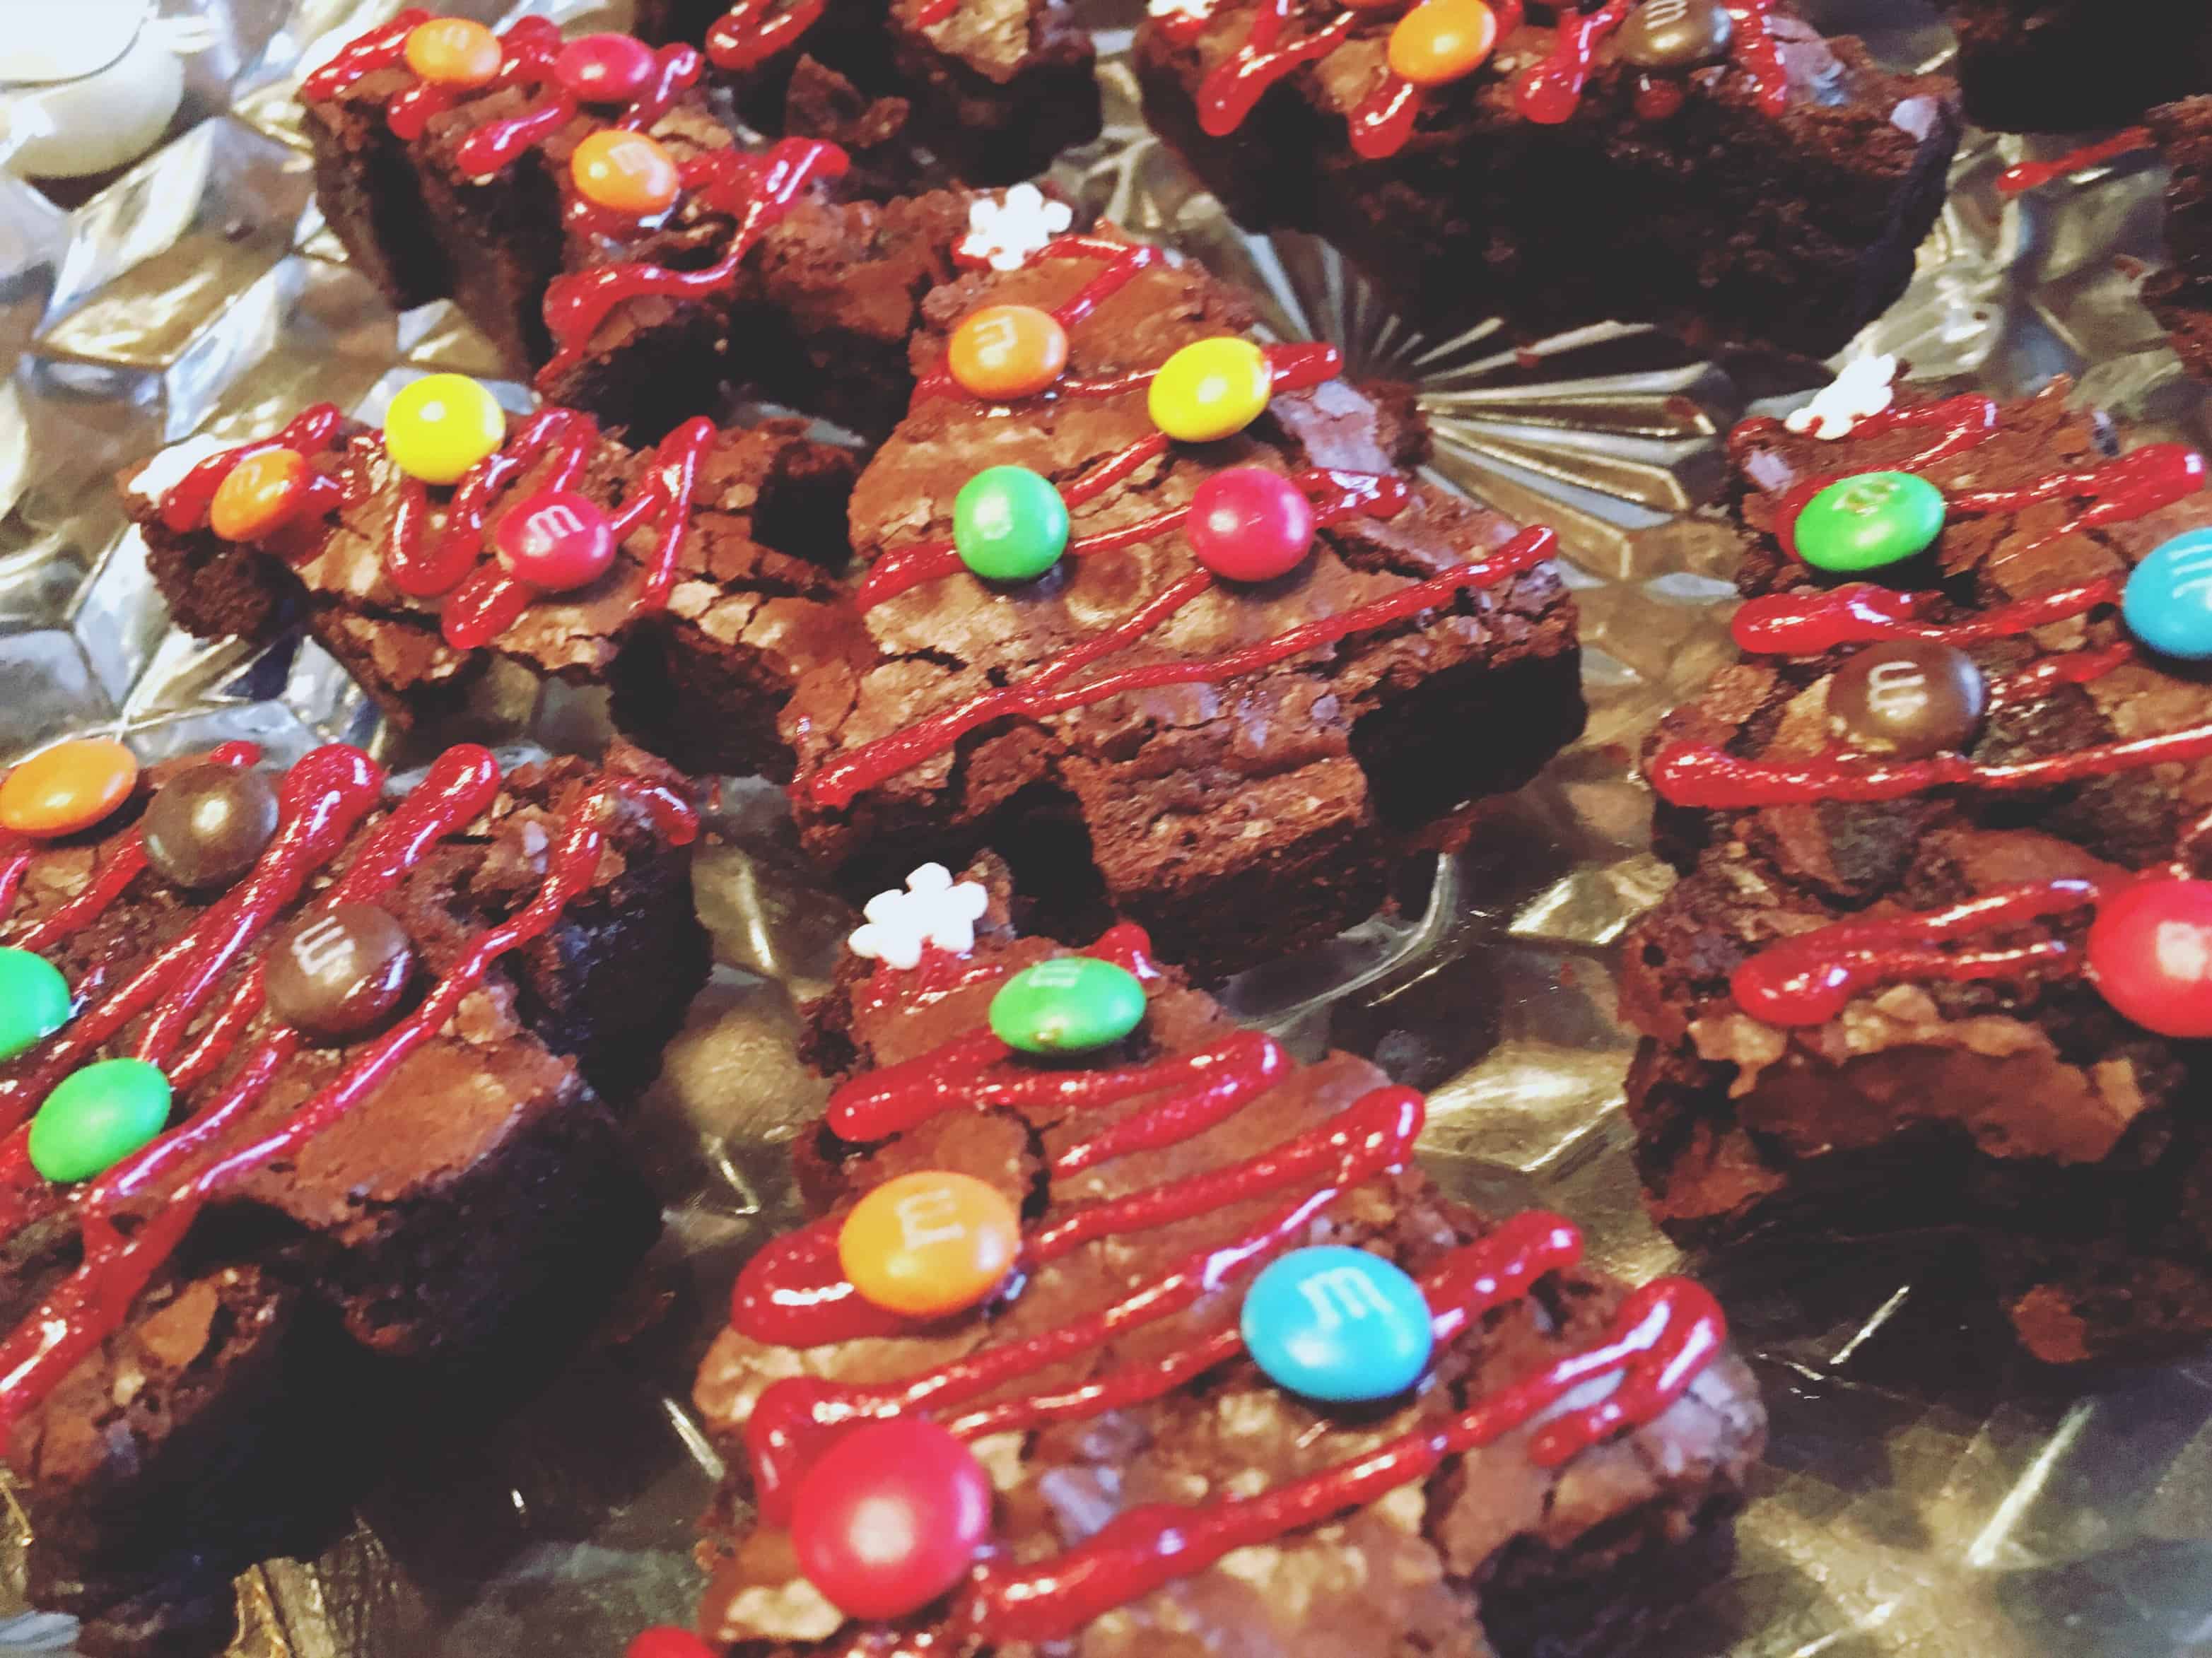 These Christmas tree brownies are so simple to make and are a perfect holiday party treat! Kids will love to decorate these trees!